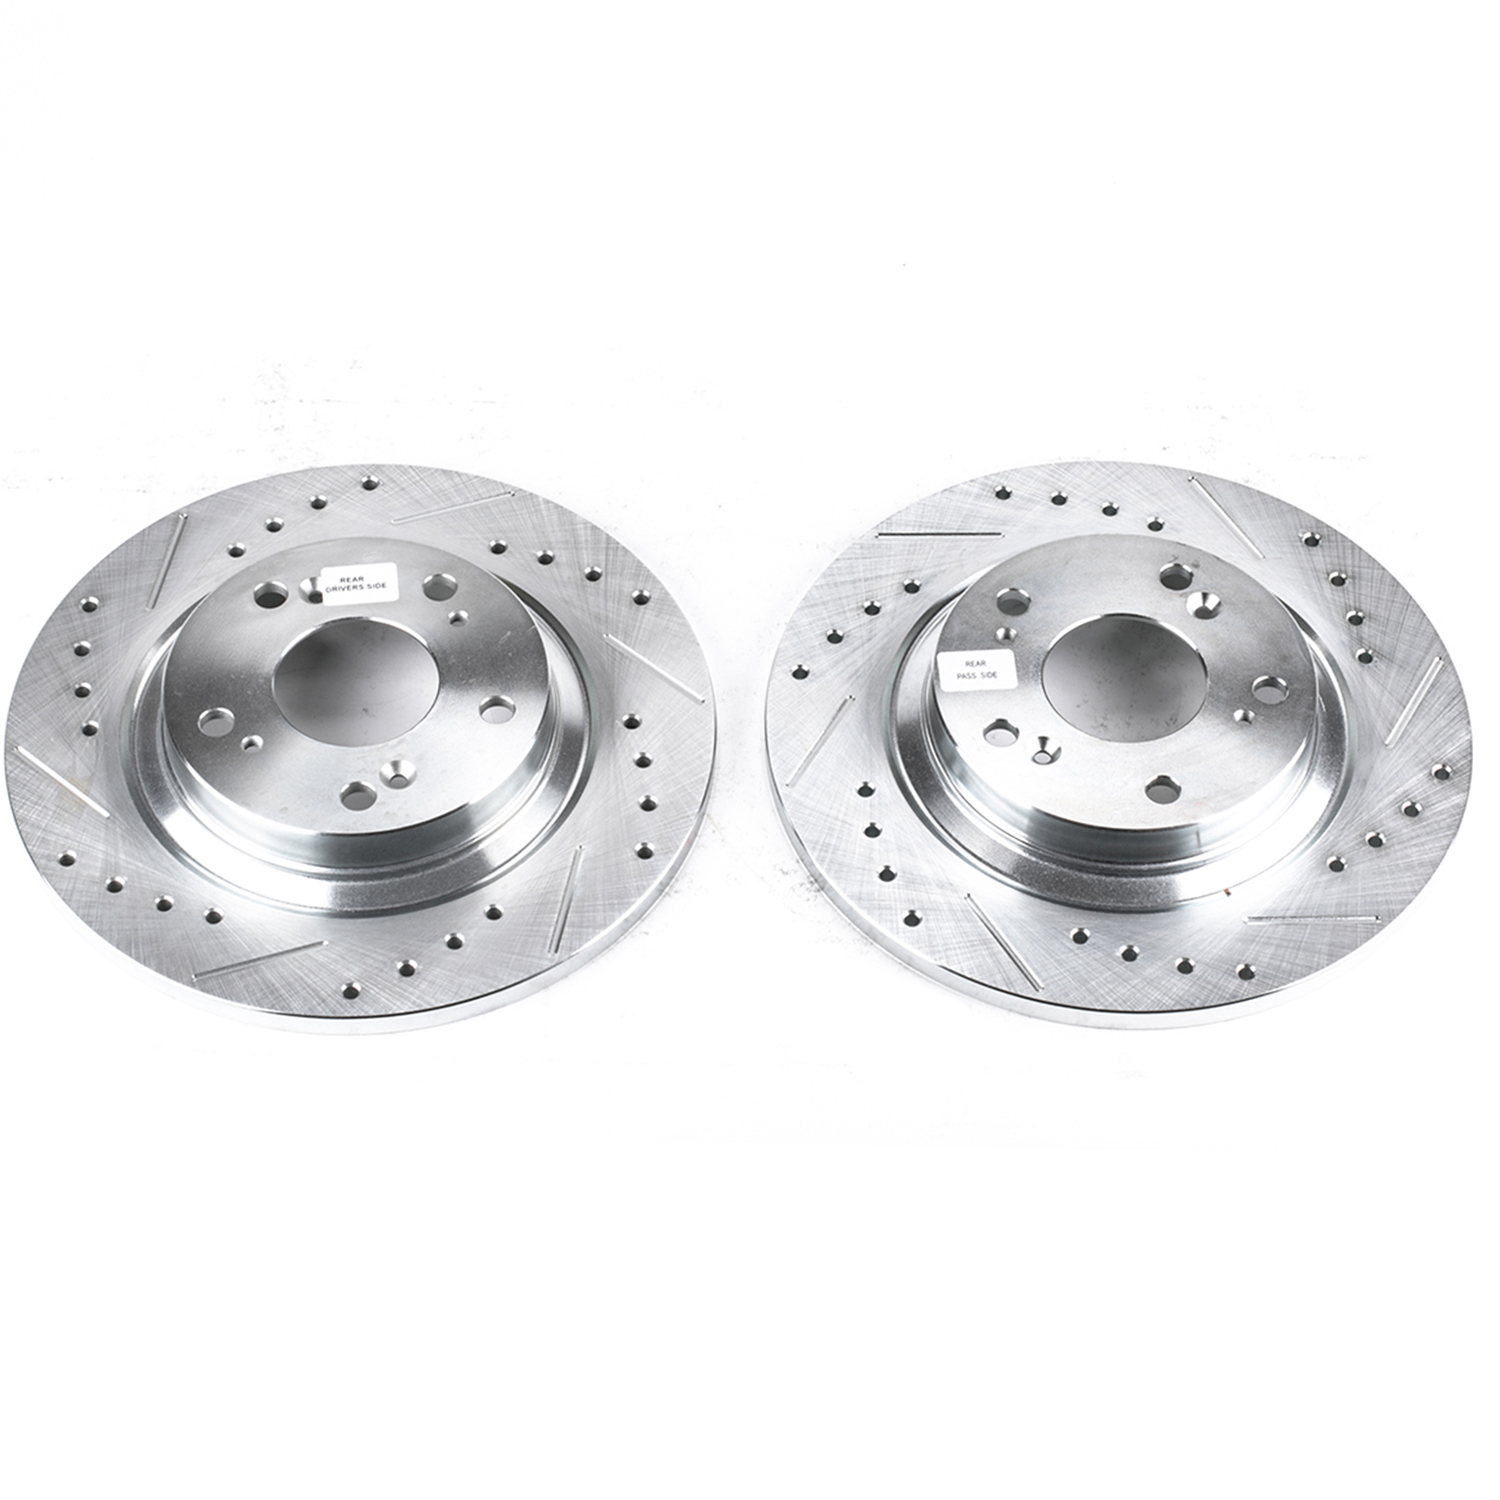 Details about   SP Performance Front Rotors for 1992 500SL Drilled Slotted ZRC F28-212E178